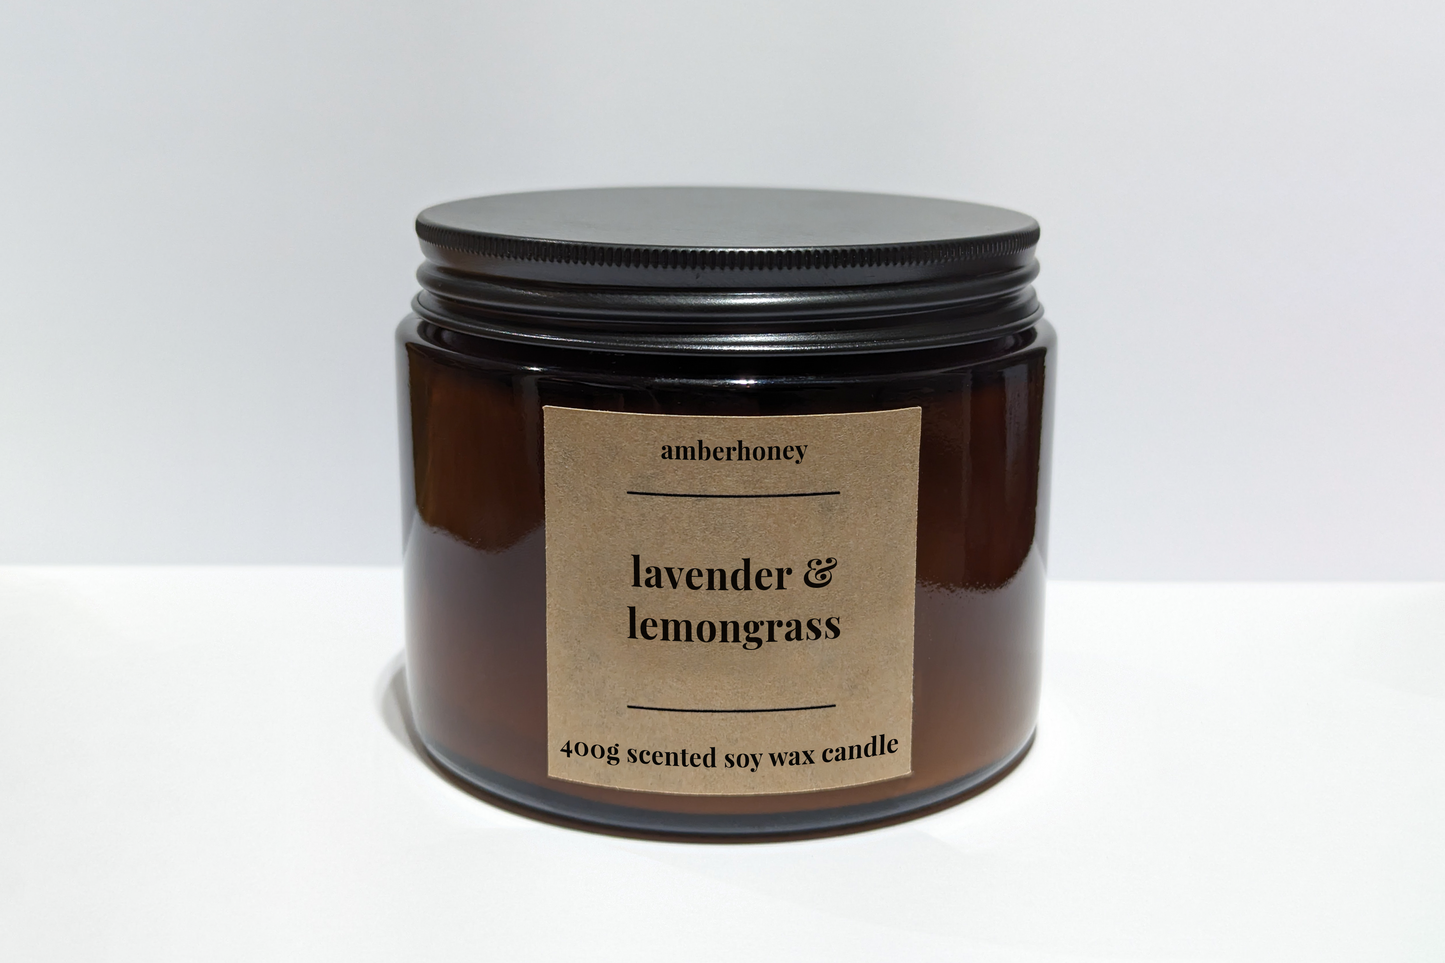 400g lavender & lemongrass soy wax candle (3 wick)